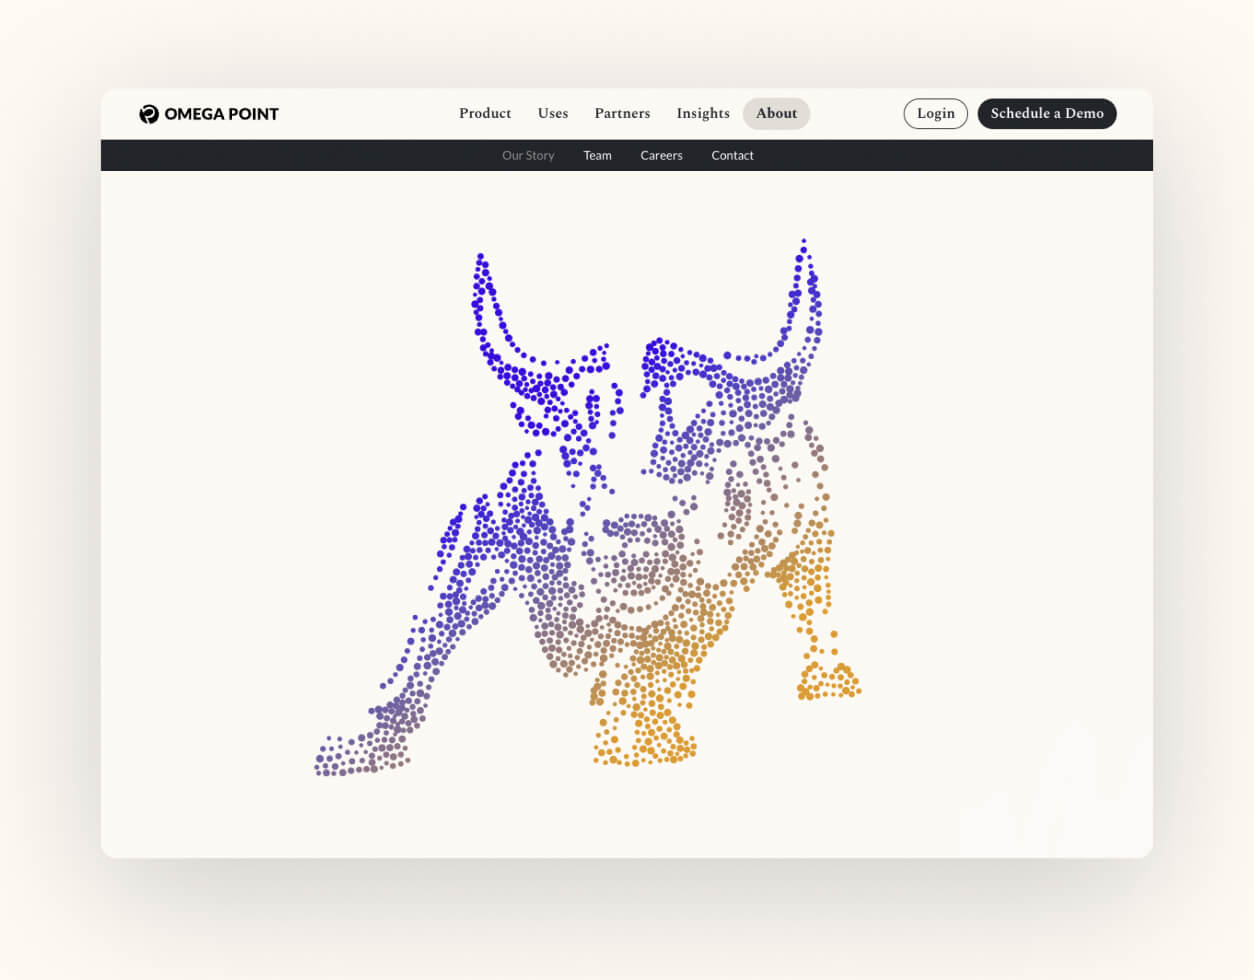 screenshot of Omega Point's website showing a wall street bull formed from datapoints